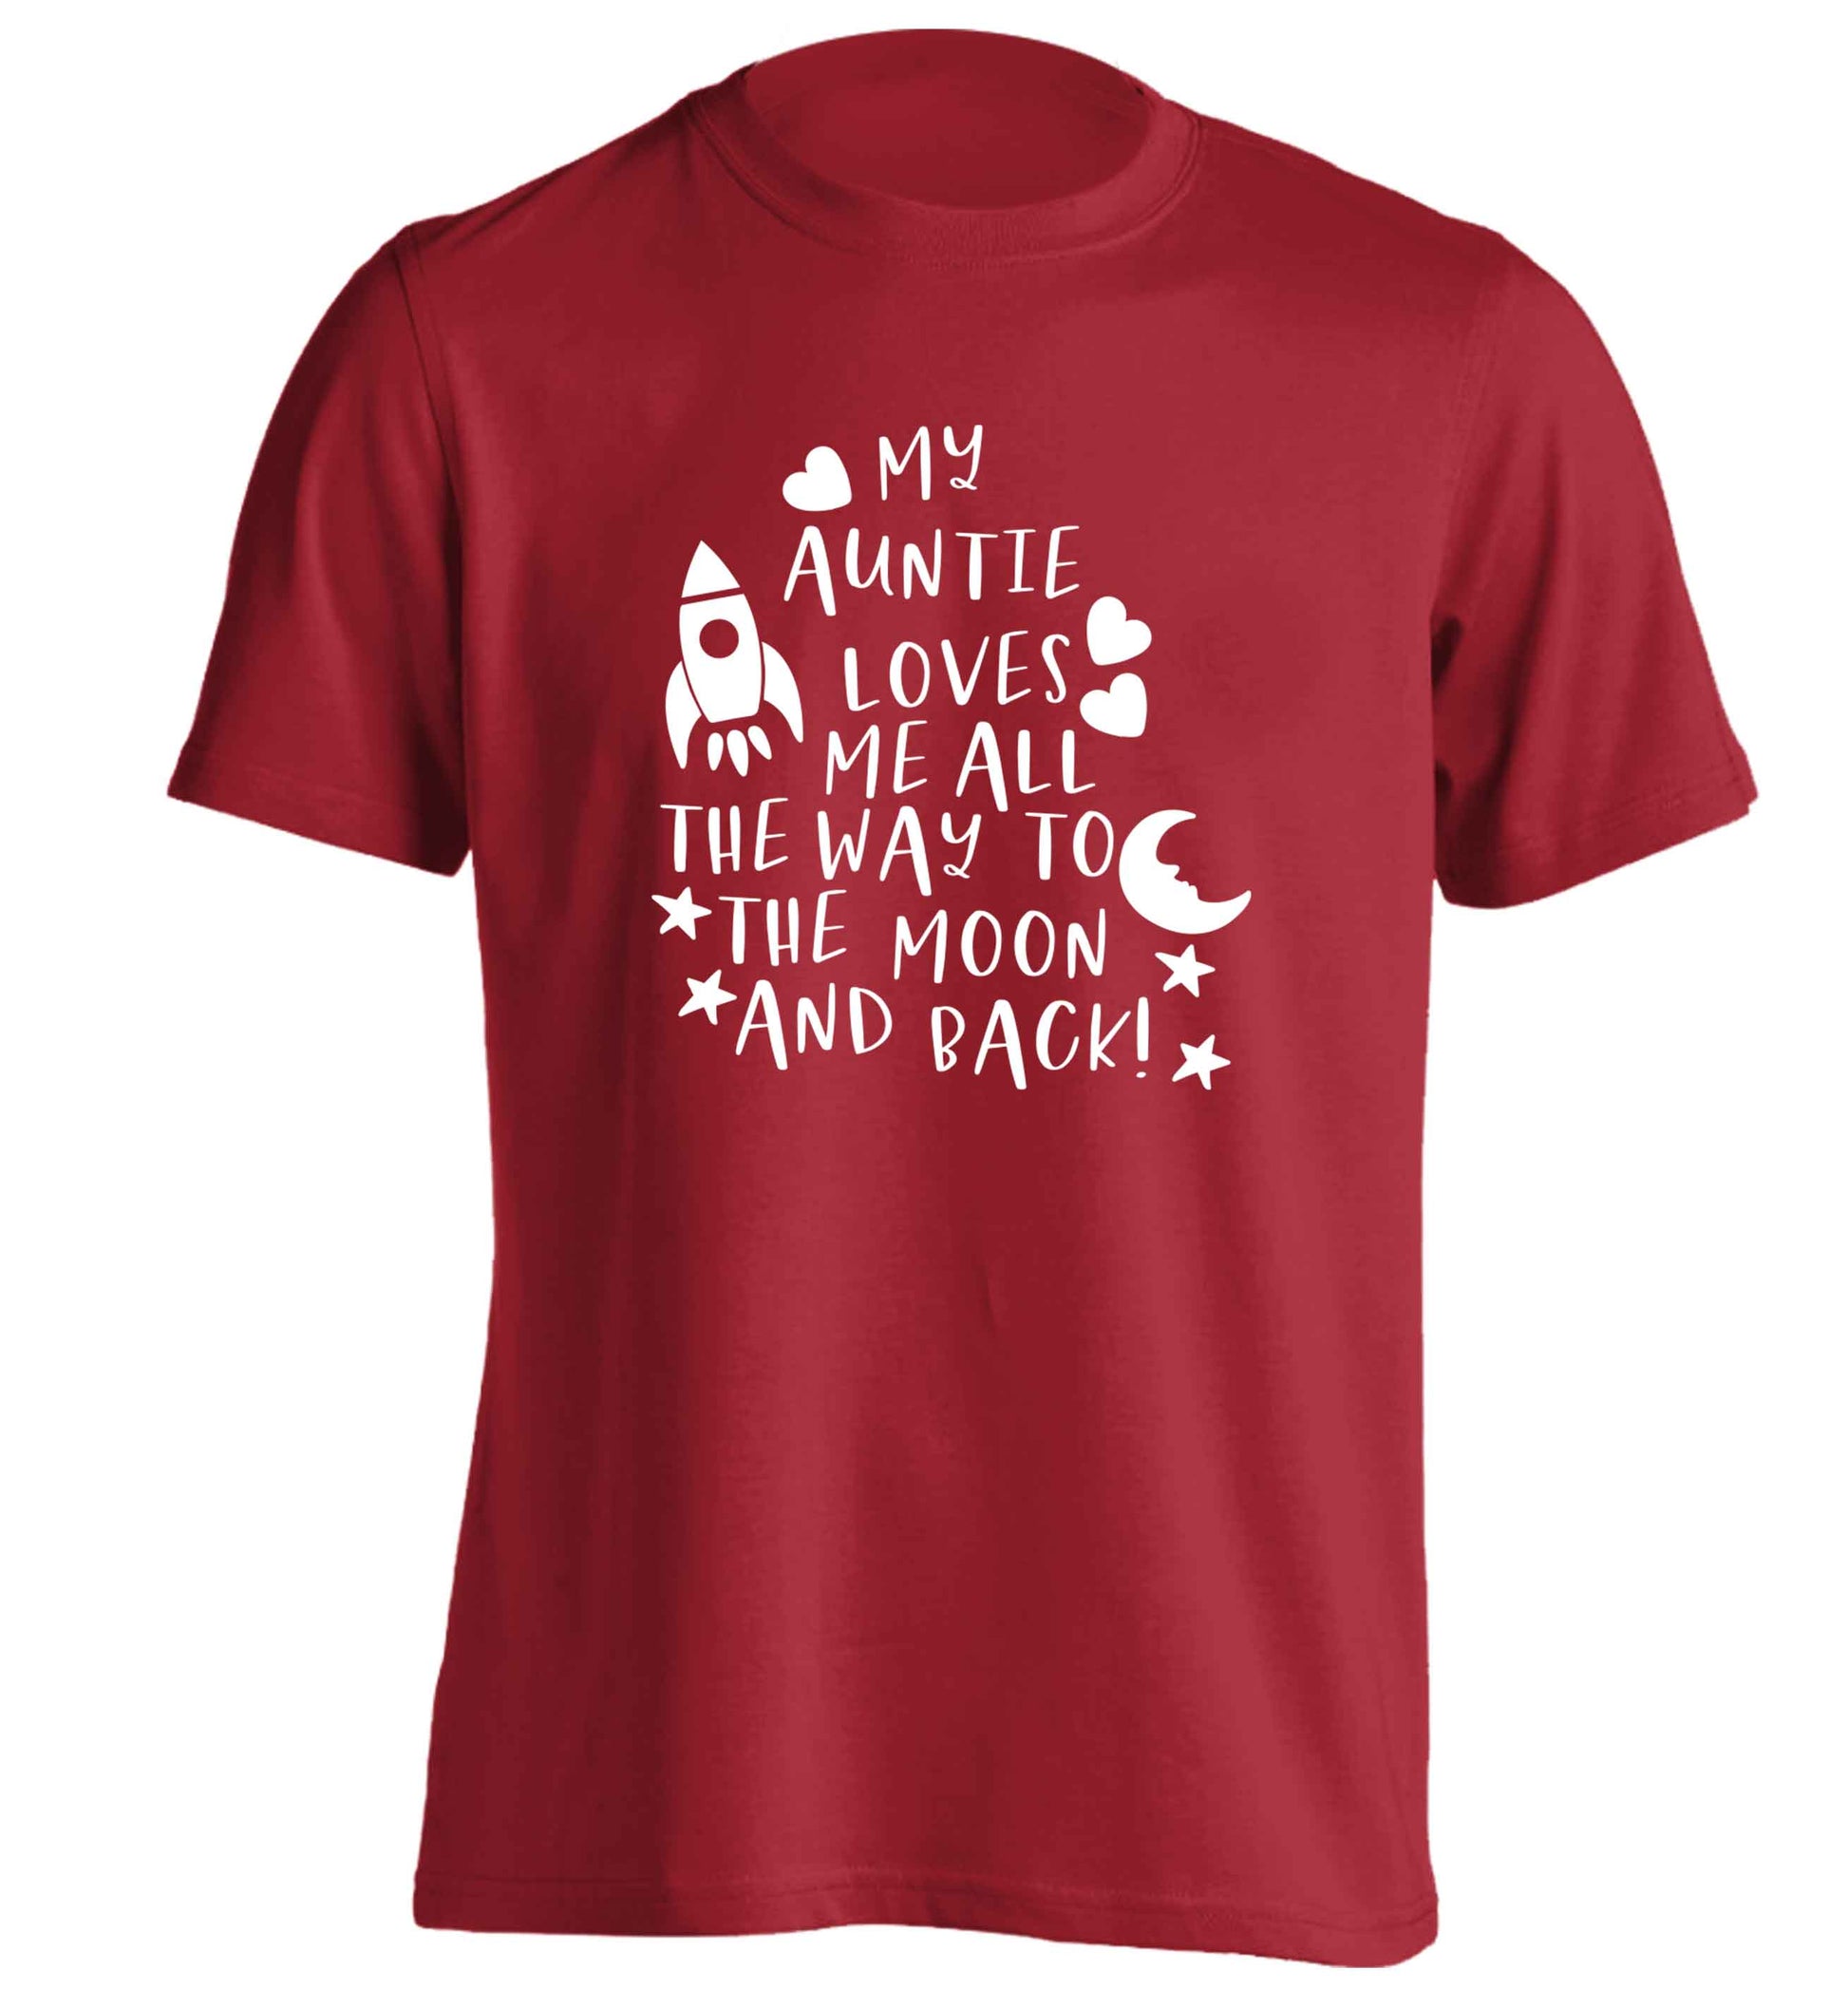 My auntie loves me all the way to the moon and back adults unisex red Tshirt 2XL